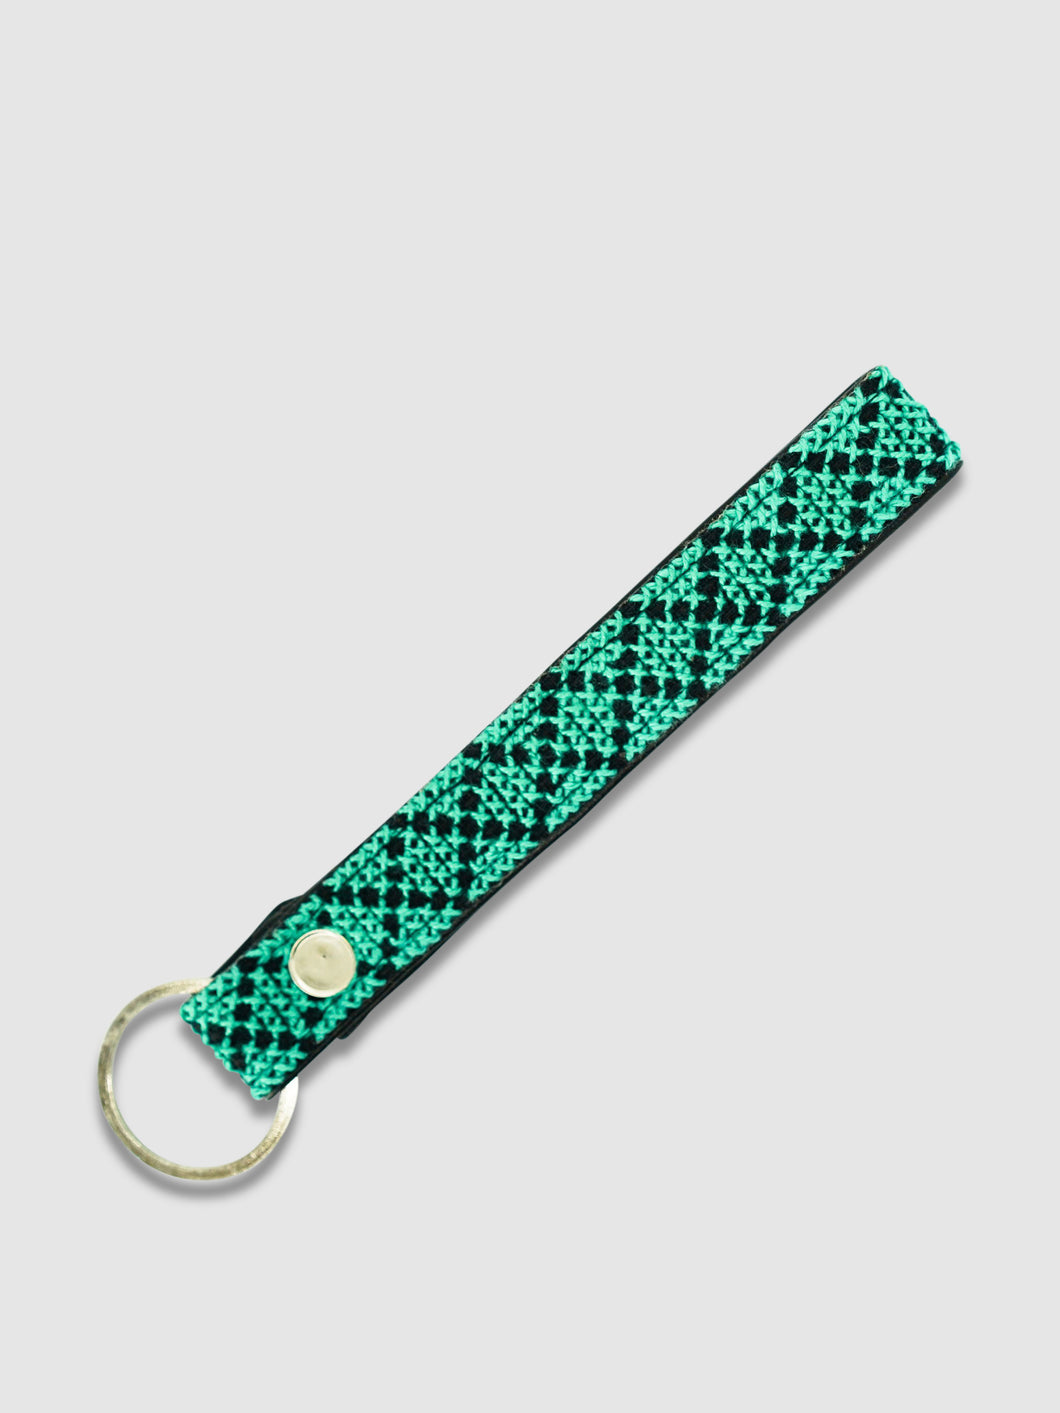 Leather Key Fob - Teal